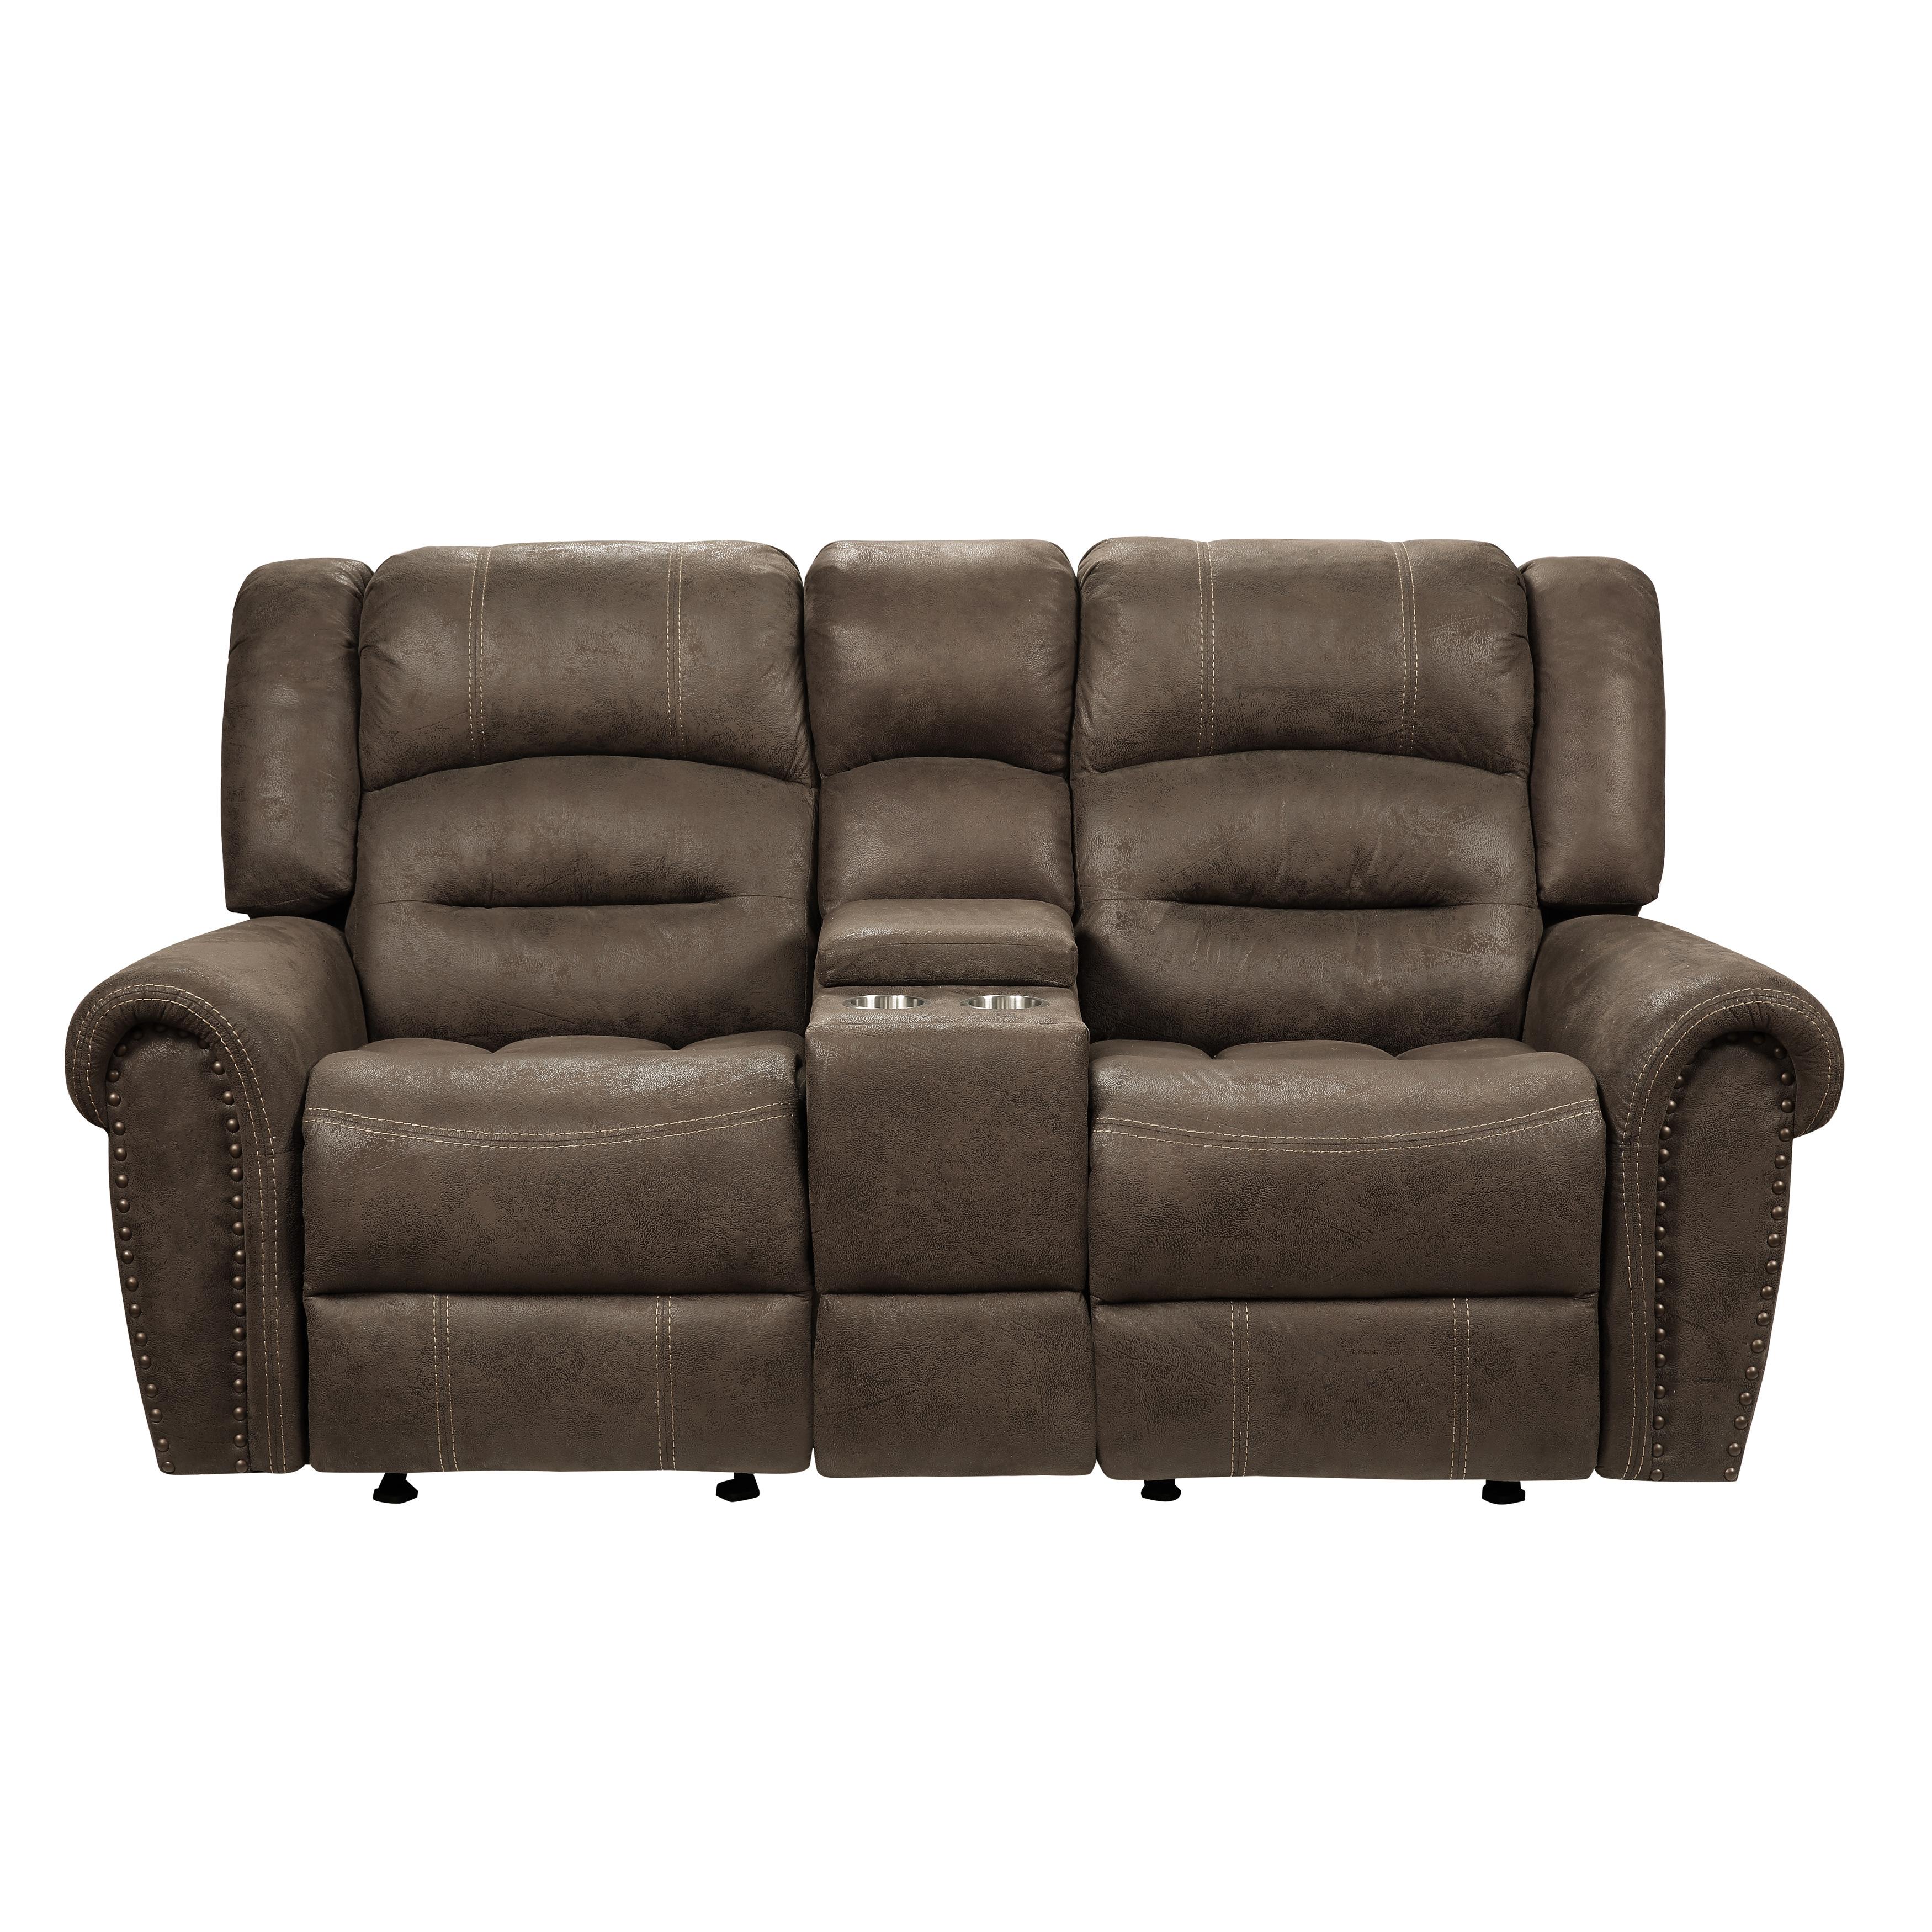 Transitional Reclining Loveseat 9467BR-2 Creighton 9467BR-2 in Brown Microfiber